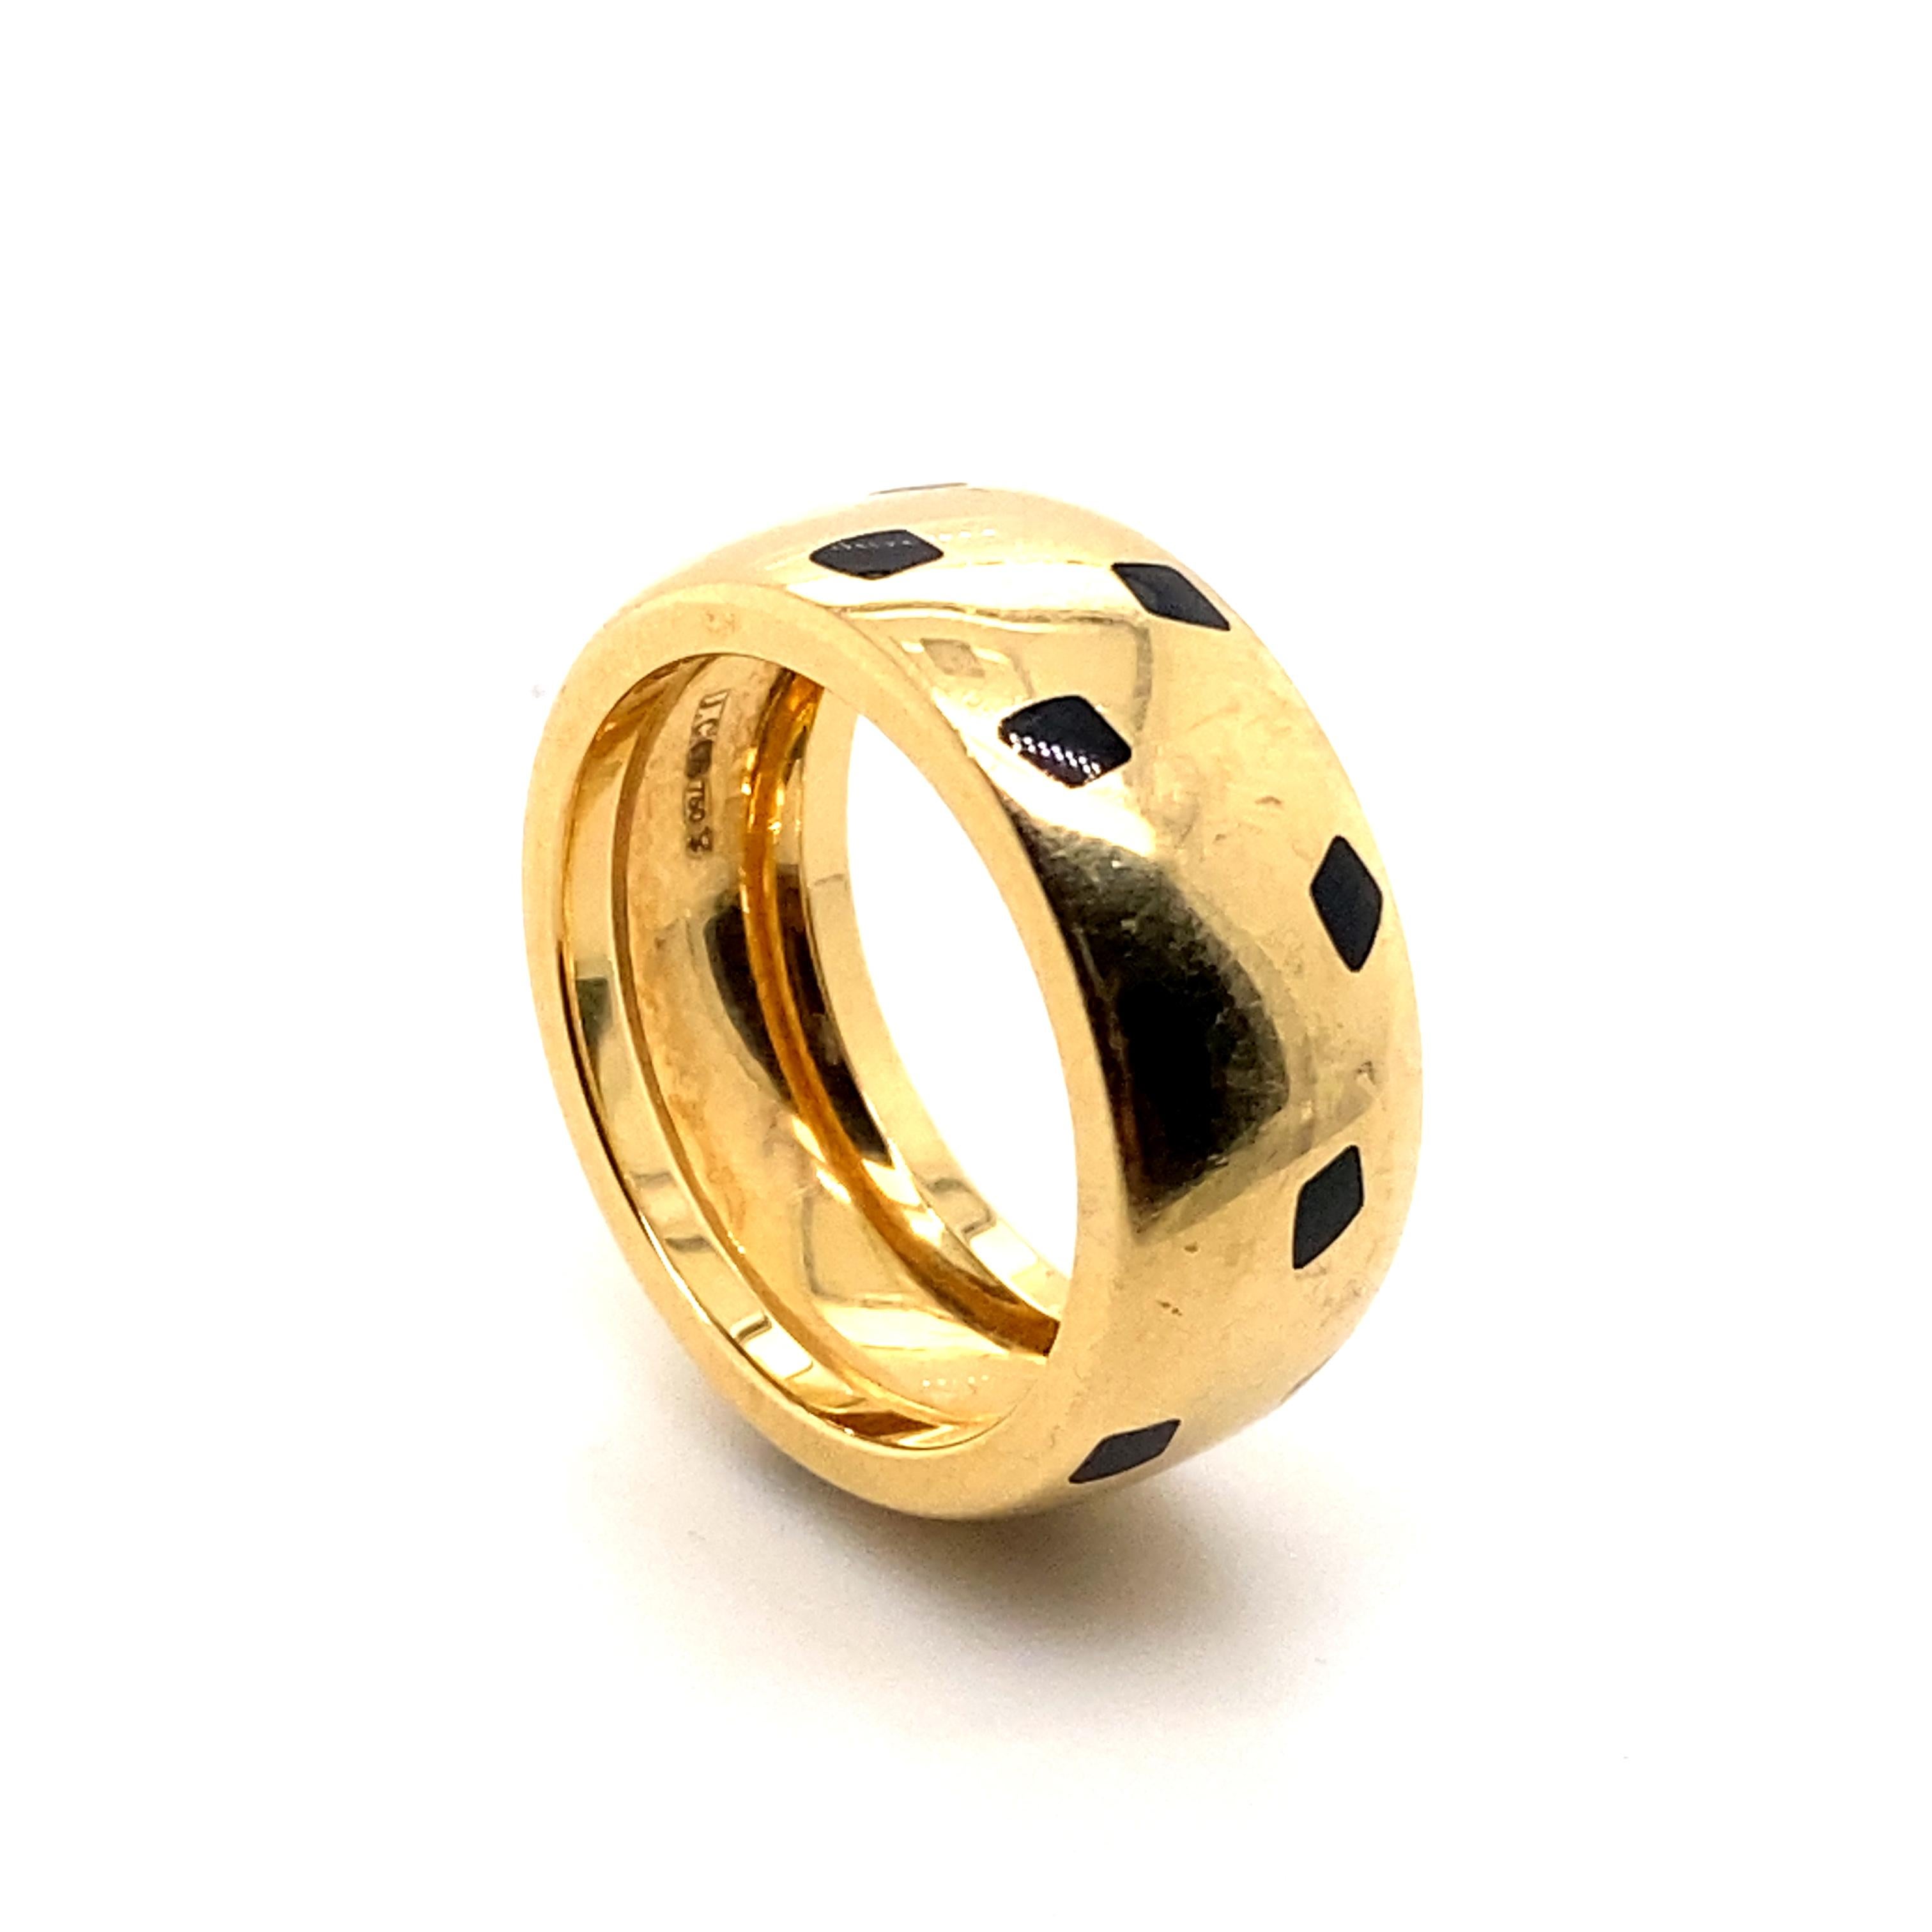 A vintage Panthère de Cartier ring with black lacquer in 18 karat yellow gold, circa 1990

The wide 18 karat yellow gold band is accented throughout with black lacquer leopard spots

The Cartier Panthère design is still looking iconic after 100